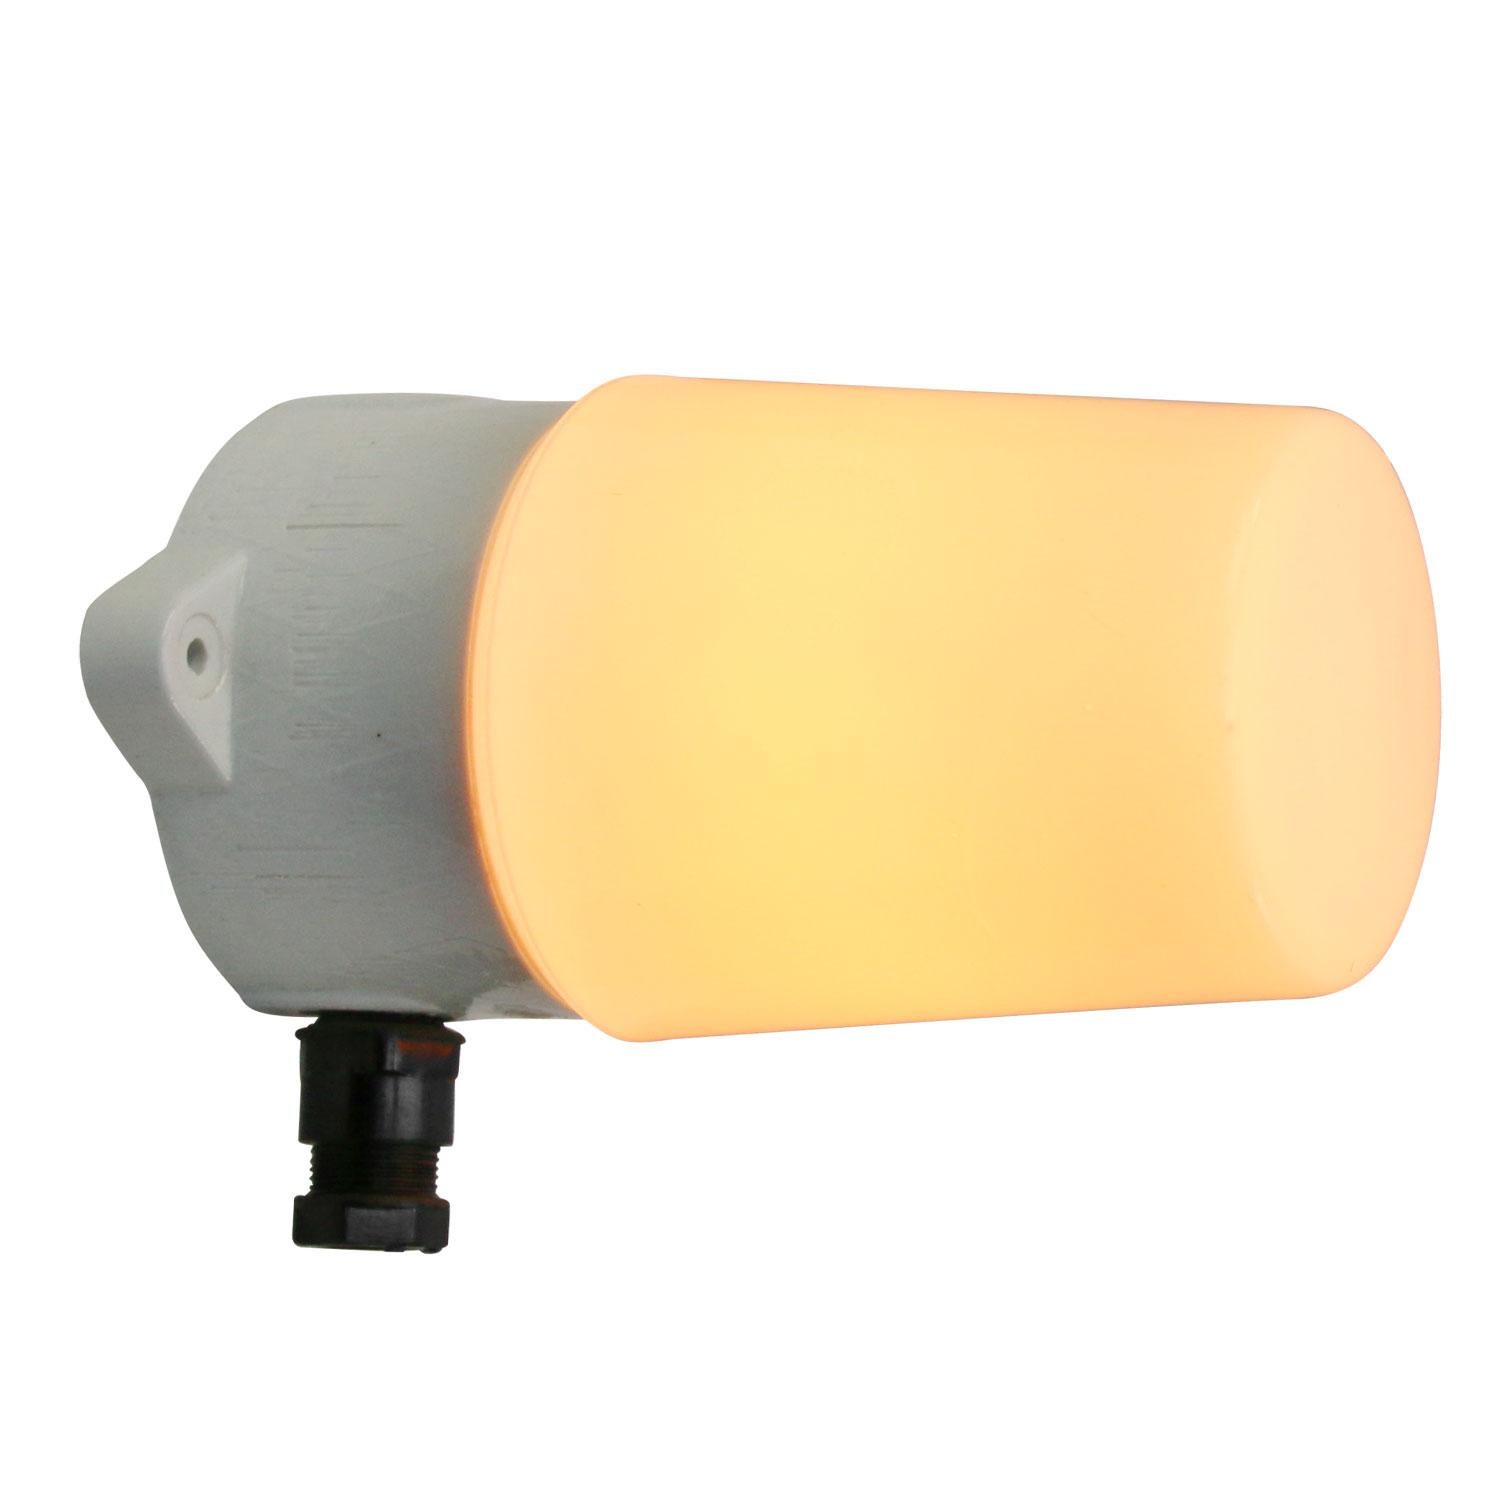 Industrial ceiling lamp.
White porcelain, white opaline glass.
2 conductors, no ground.

Weight: 0.90 kg / 2 lb

Priced per individual item. All lamps have been made suitable by international standards for incandescent light bulbs, energy-efficient